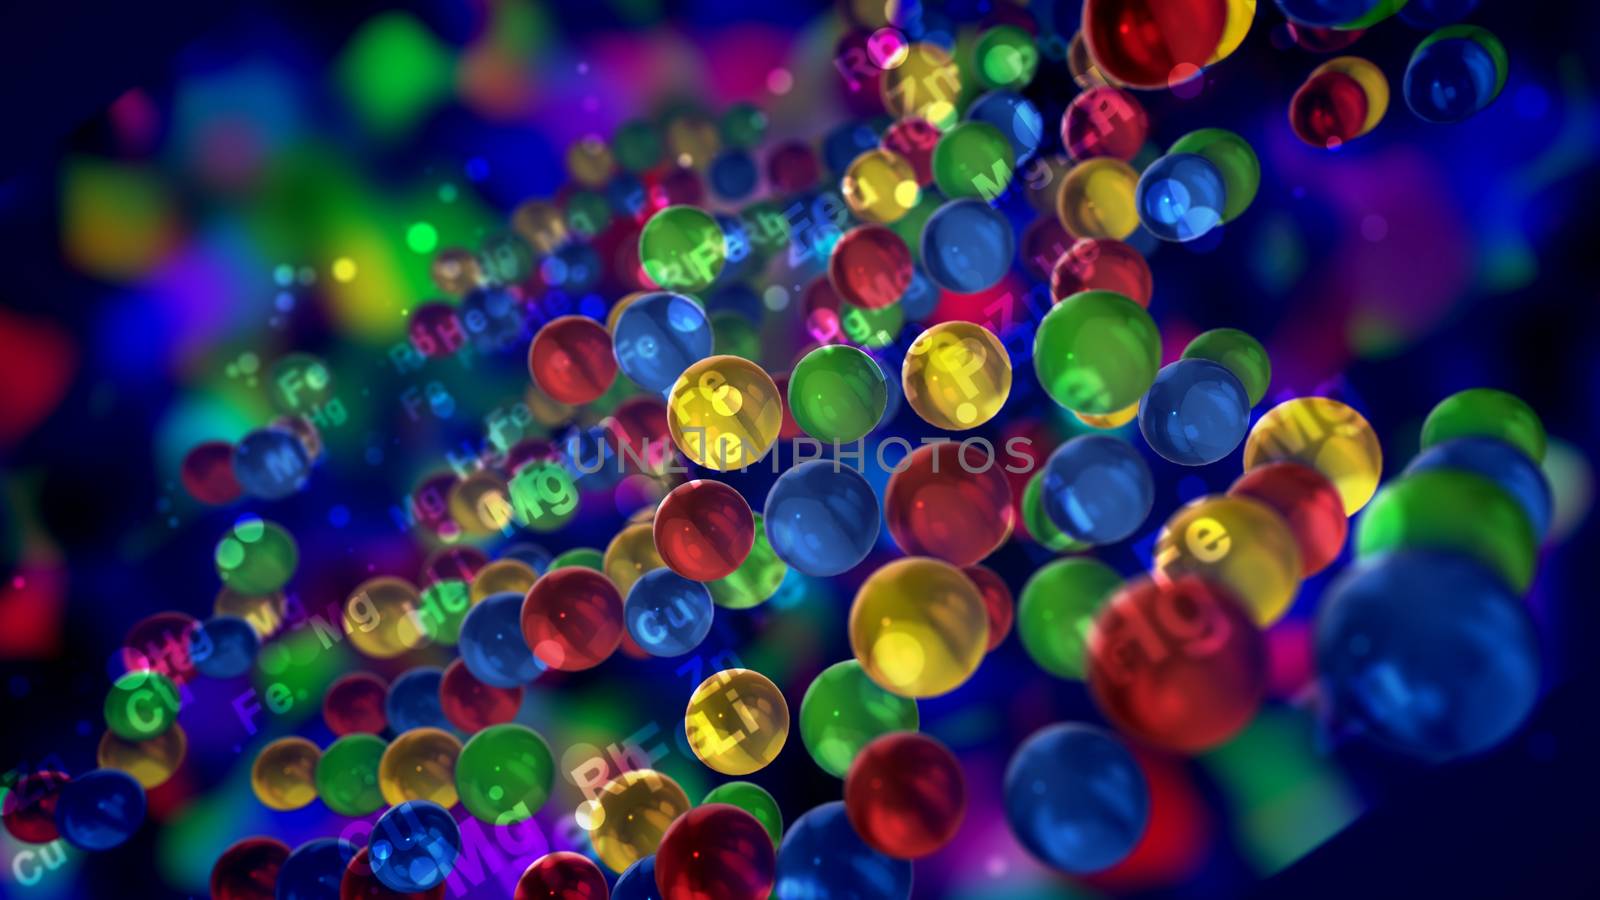 An exciting 3d illustration of multicolored balls with the symbols of chemical elements  placed in several flat surfaces moving and flying in the dark blue backdrop in a cheery way.